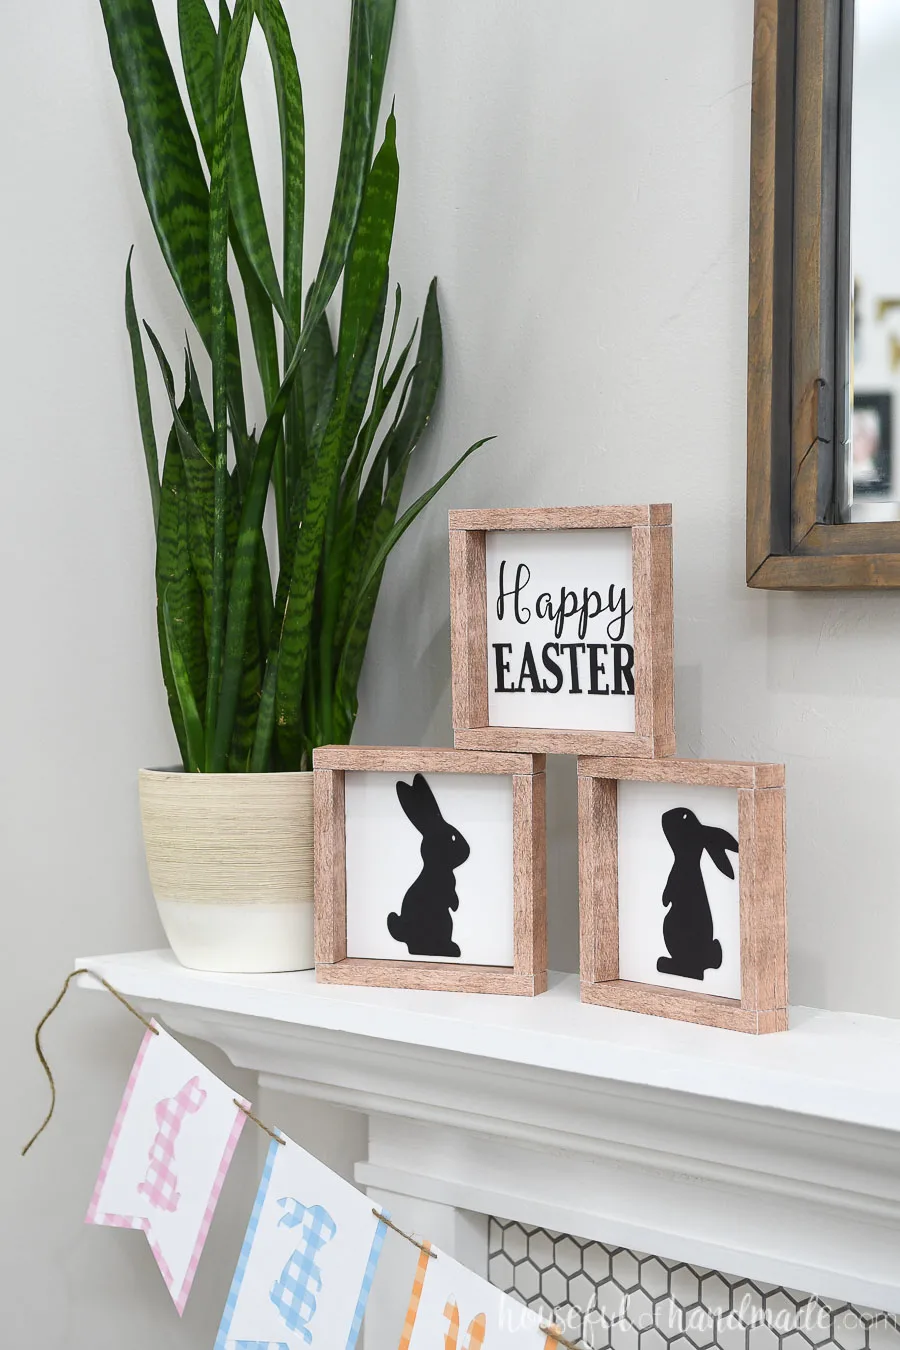 Fireplace mantel decorate with Easter signs for spring.